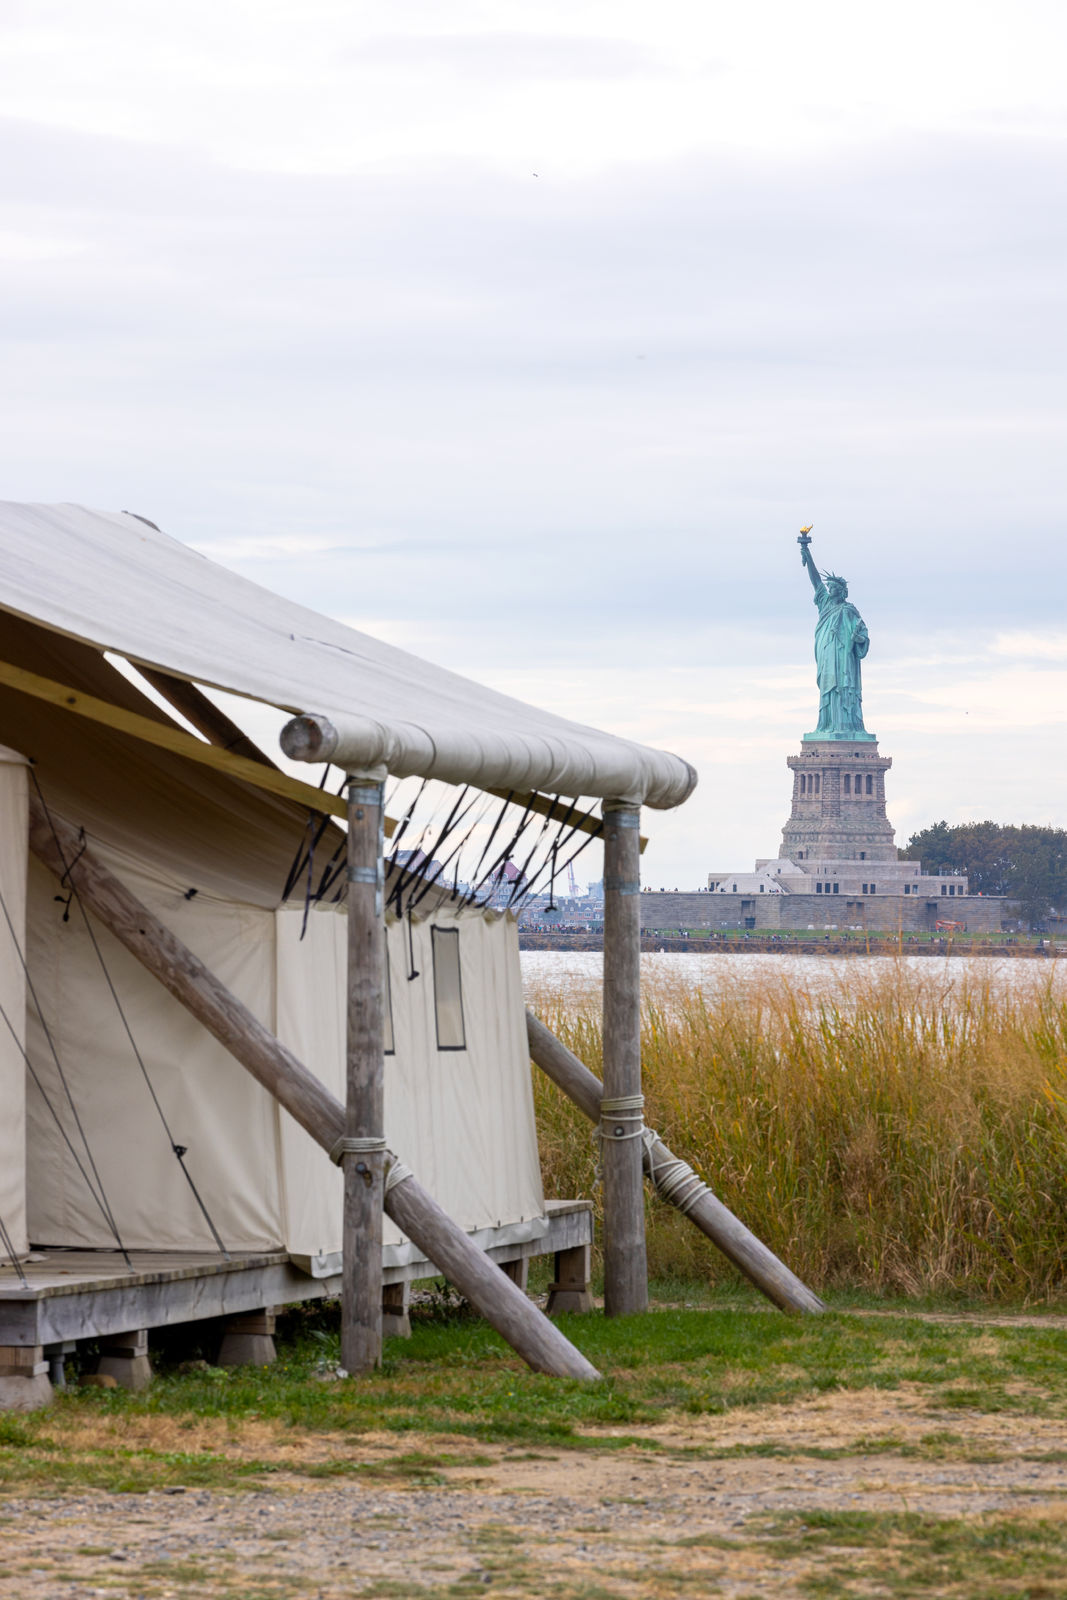 View of statue of liberty with the tent